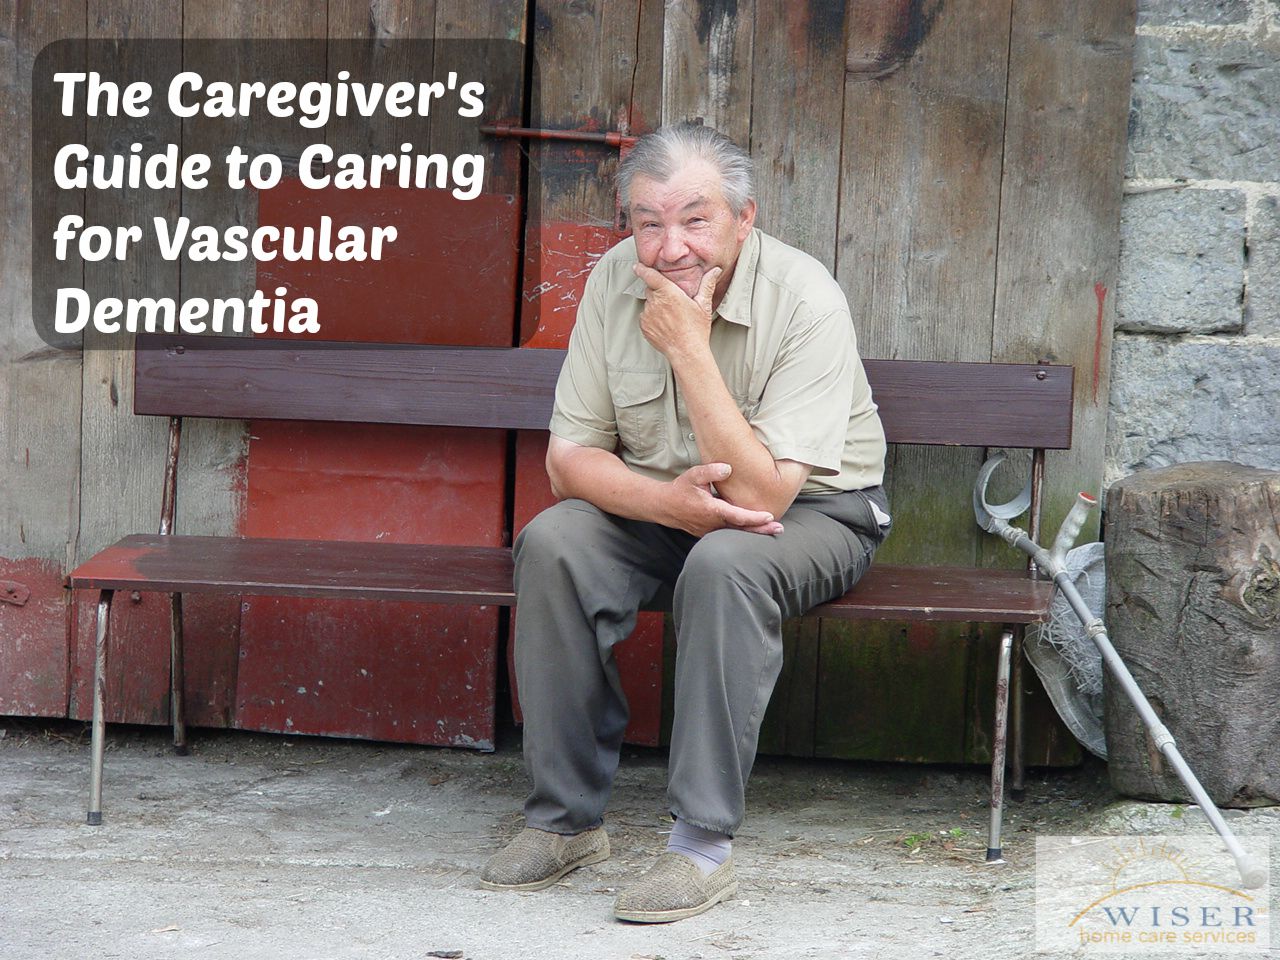 Vascular dementia is the second most common form of dementia, knowing the symptoms and signs is the first step to caring for vascular dementia patients.